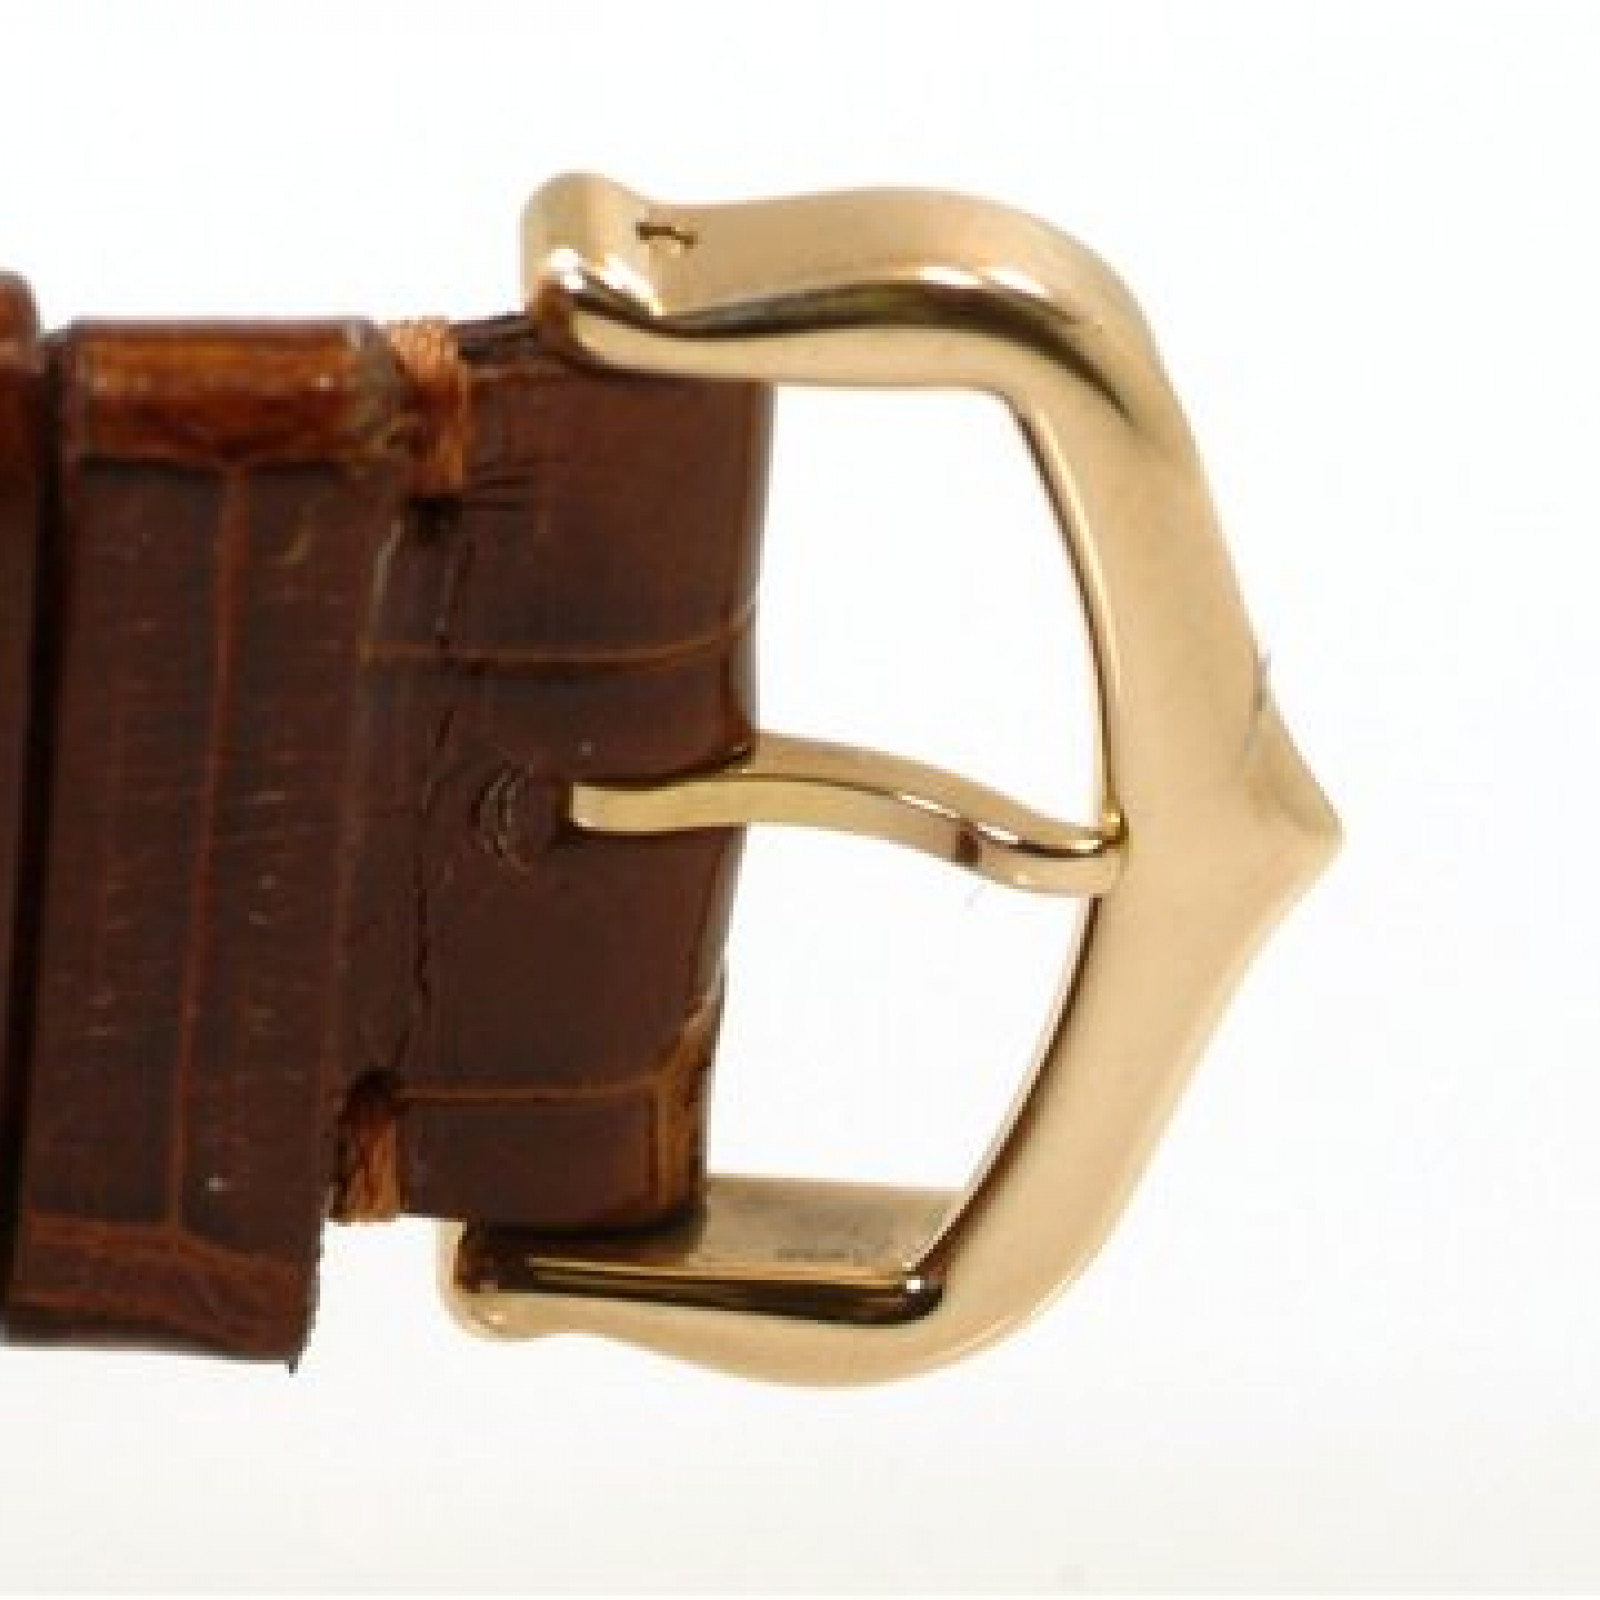 Sell Cartier Tank Louis W1529756 Used